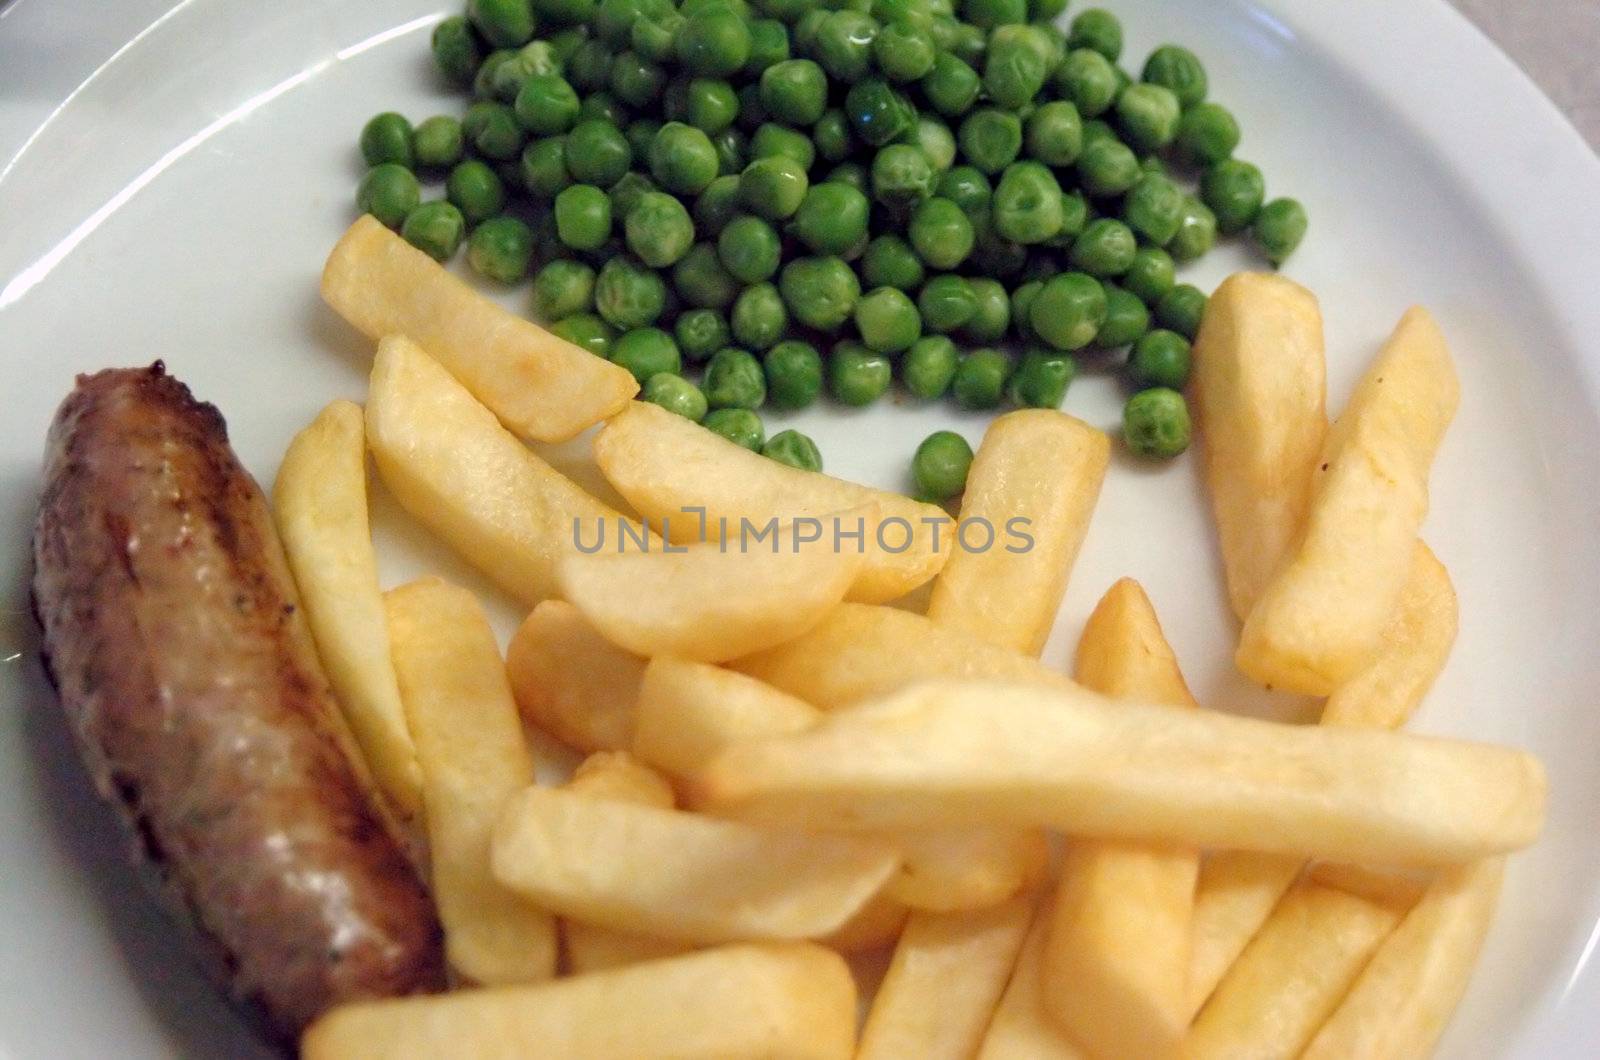 sausage chips and peas typical english kids menu in a pub or restaurant